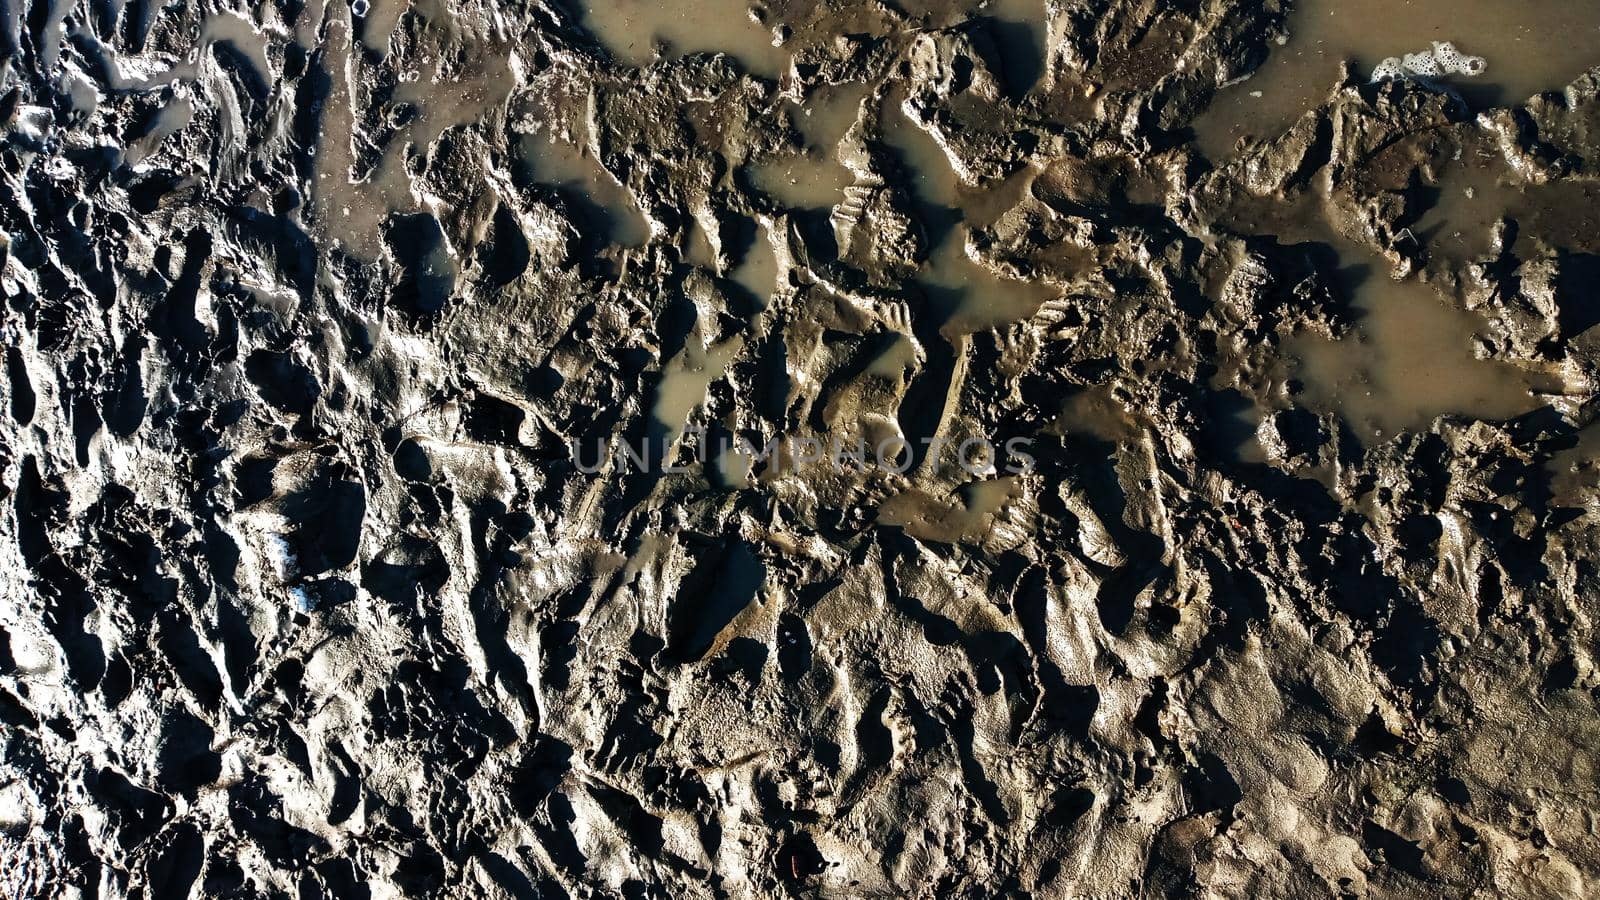 Iiquid mud with footprints. Footprint or imprint shoe in the mud.Mud texture or wet brown soil as natural organic clay and geological sediment mixture as in roughing it in a dirty muddy country ground after the rain or rainy.